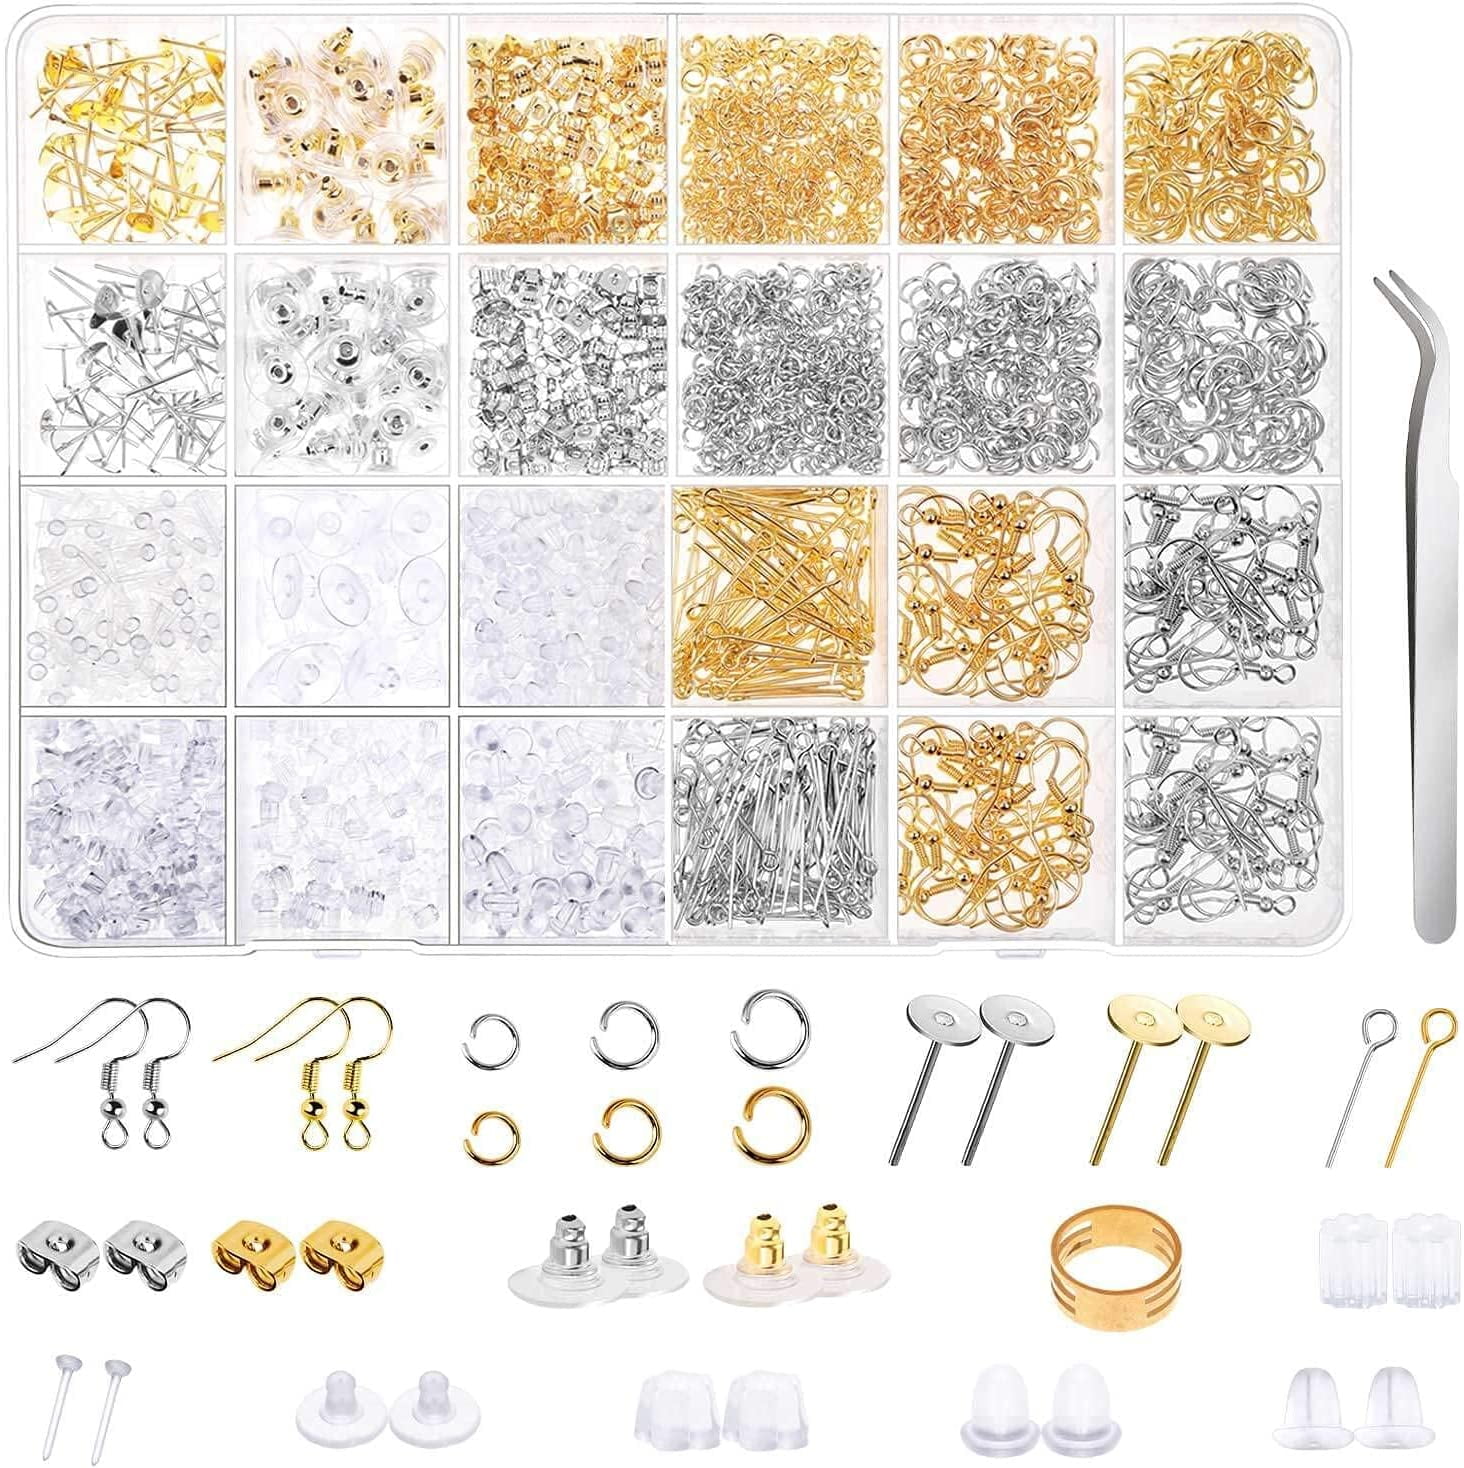 TOSEERY Earring Making Supplies Kit, 2418pcs Earring Hardware Pieces Repair Parts with Earring Hooks Posts Backs and Jump Rings for Making Earrings Studs and